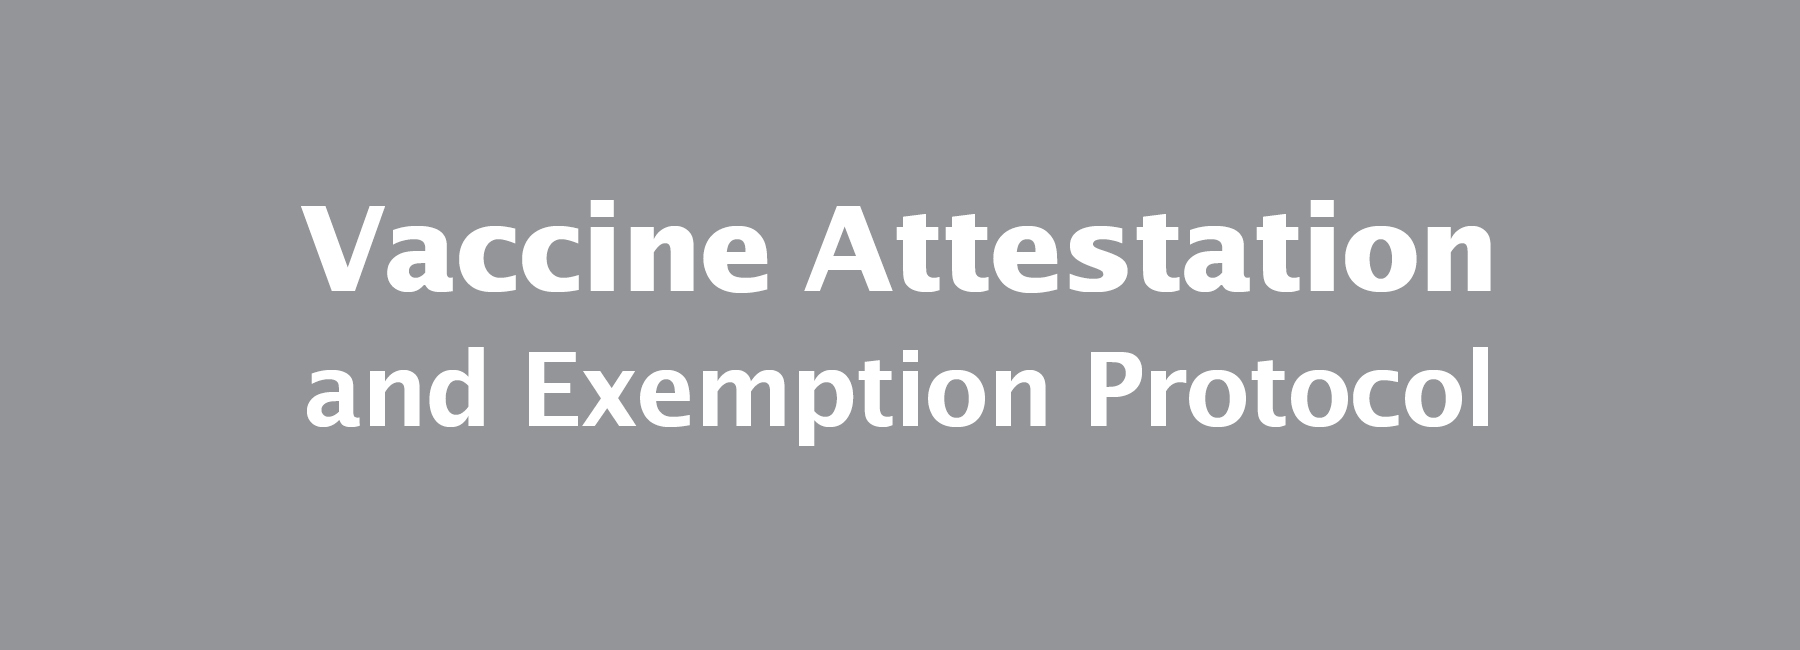 Vaccine Attestation and Exemption Protocol